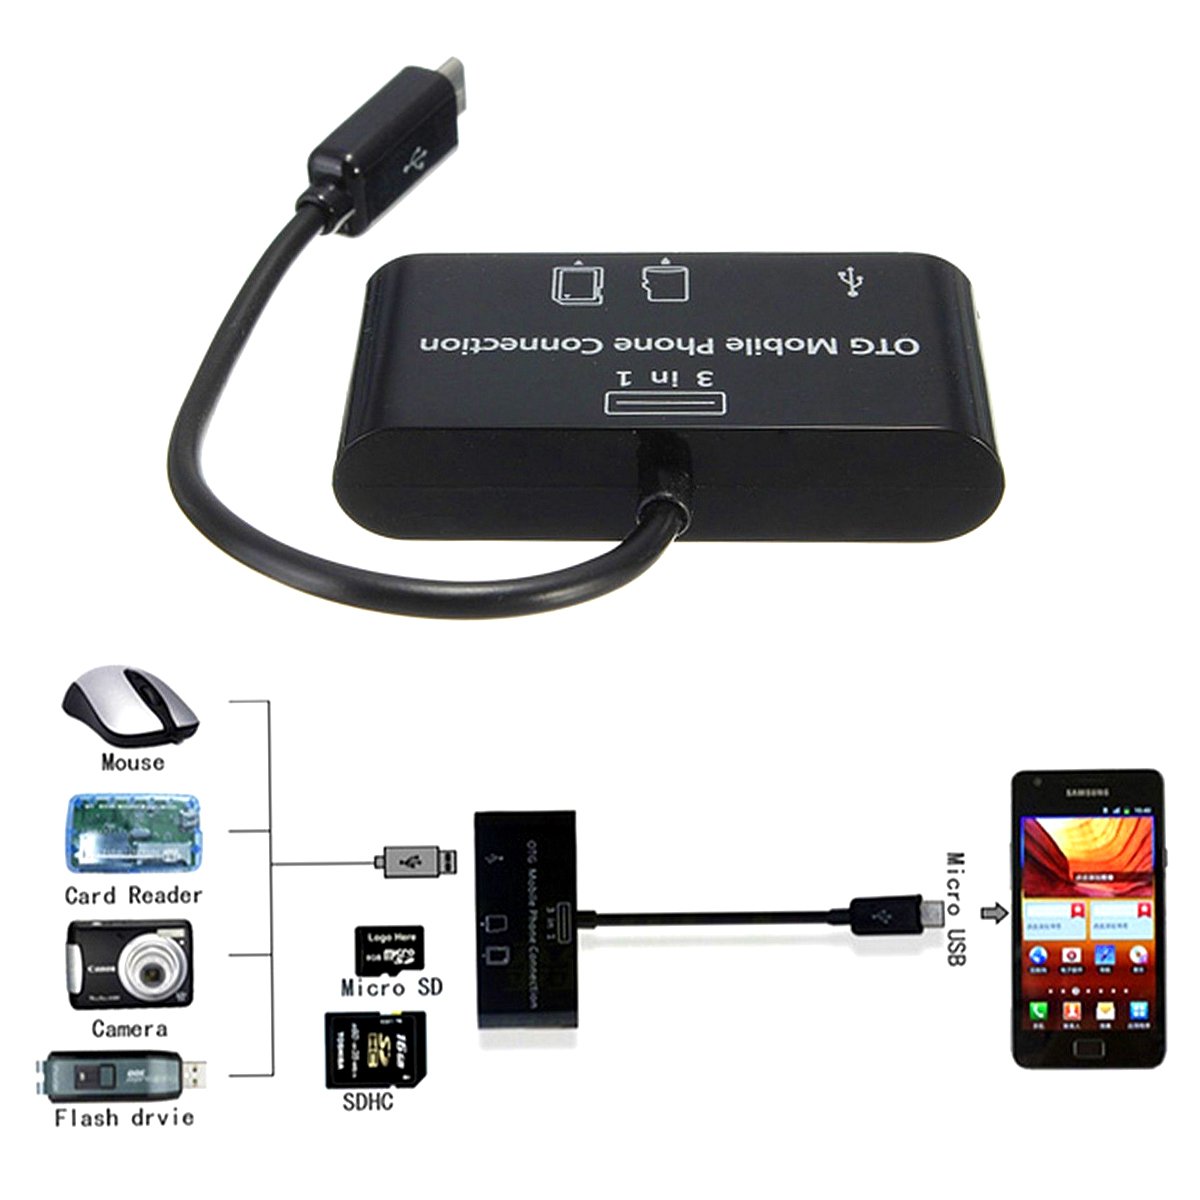 ''Type-C - USB / SD Card Reader Card Hub Adapter Supports SD, MMC, Micro SD, and More''''''''''